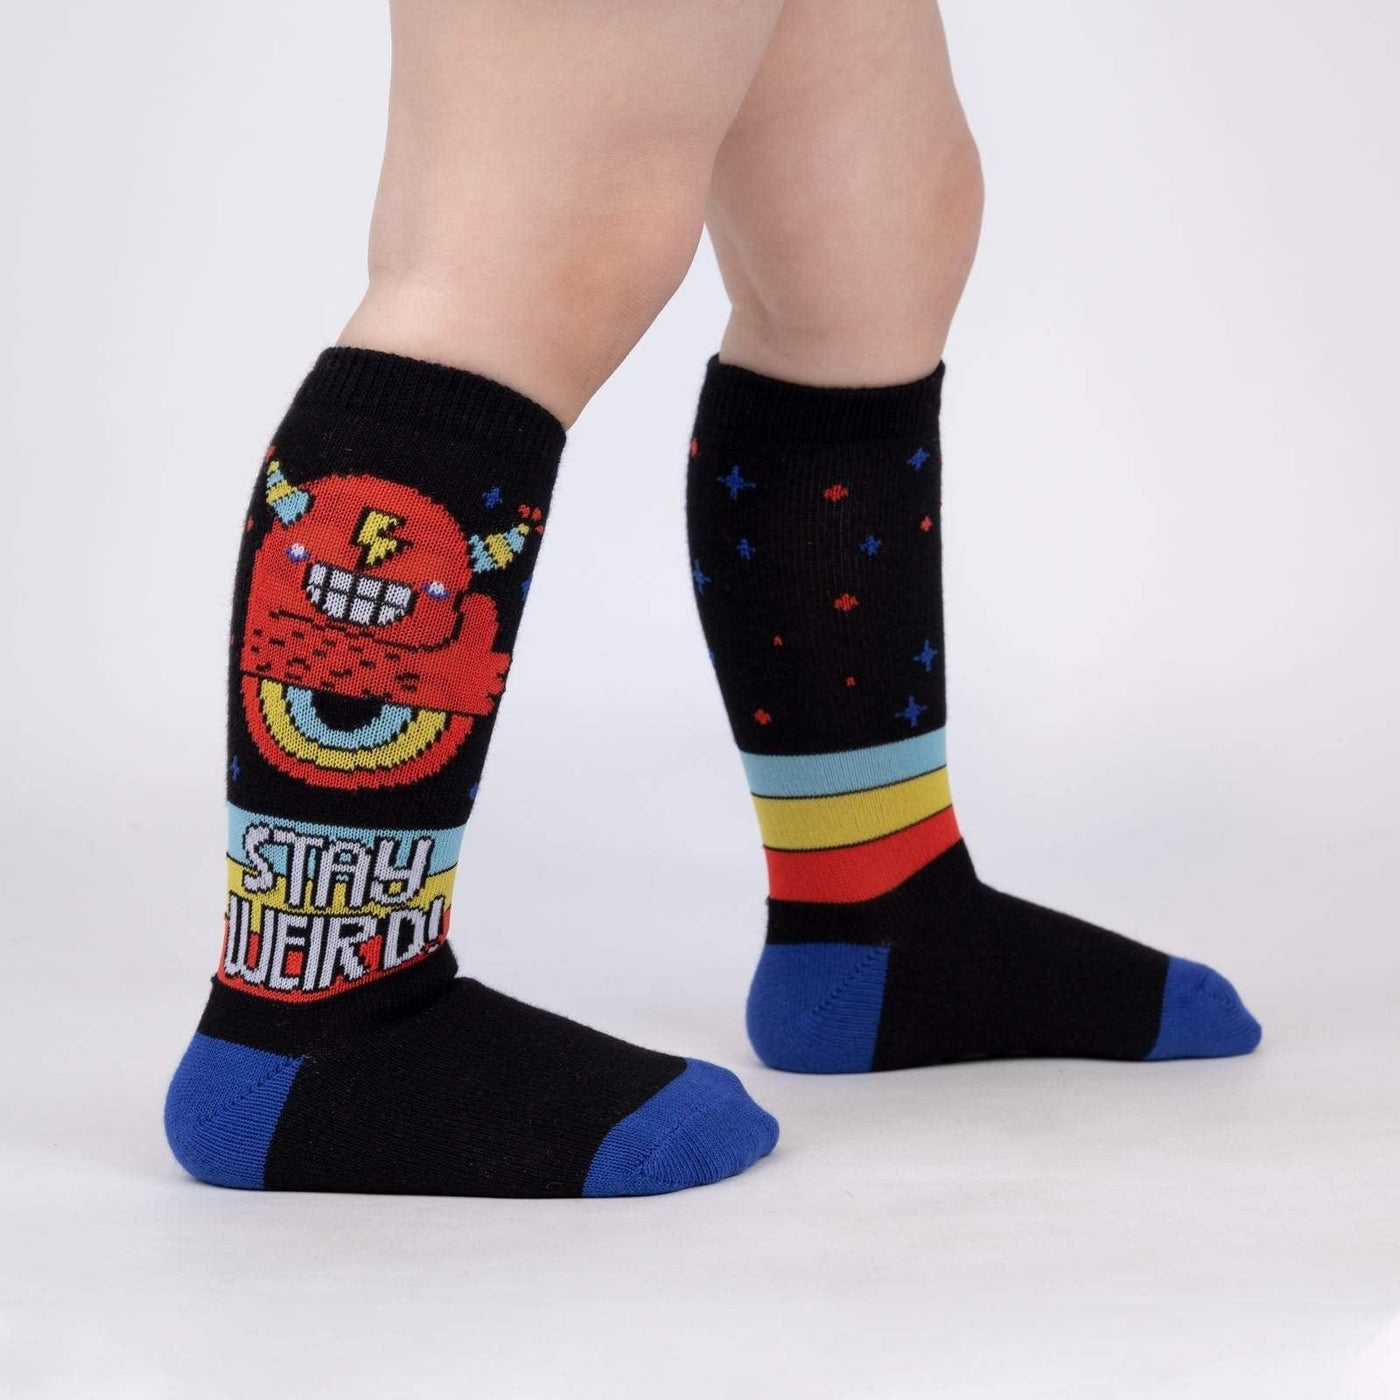 Stay Weird, Toddler Knee High - Sock It To Me - The Sock Monster